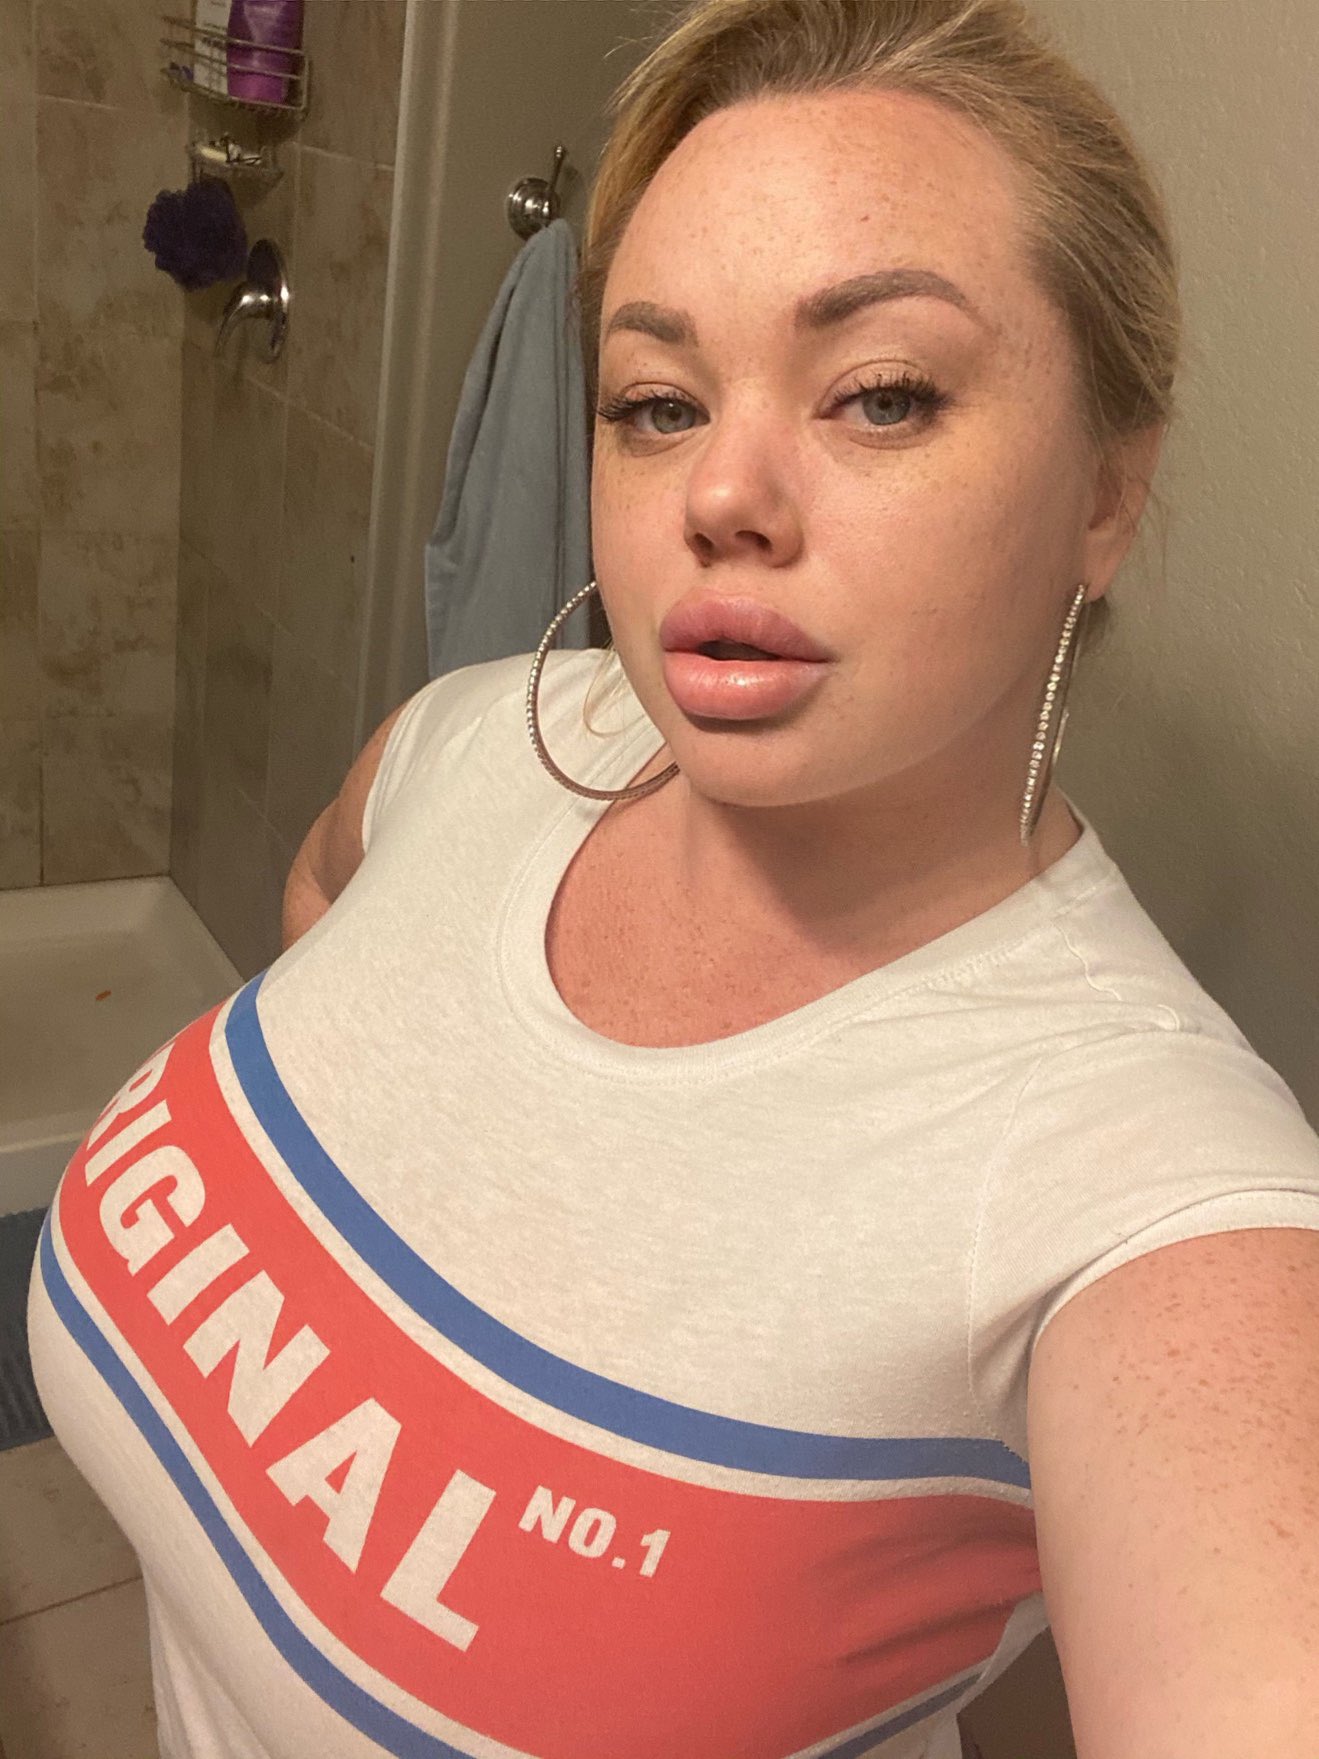 ❤️ if you’d still fuck me with no makeup on https://t.co/4tEwjMeldn